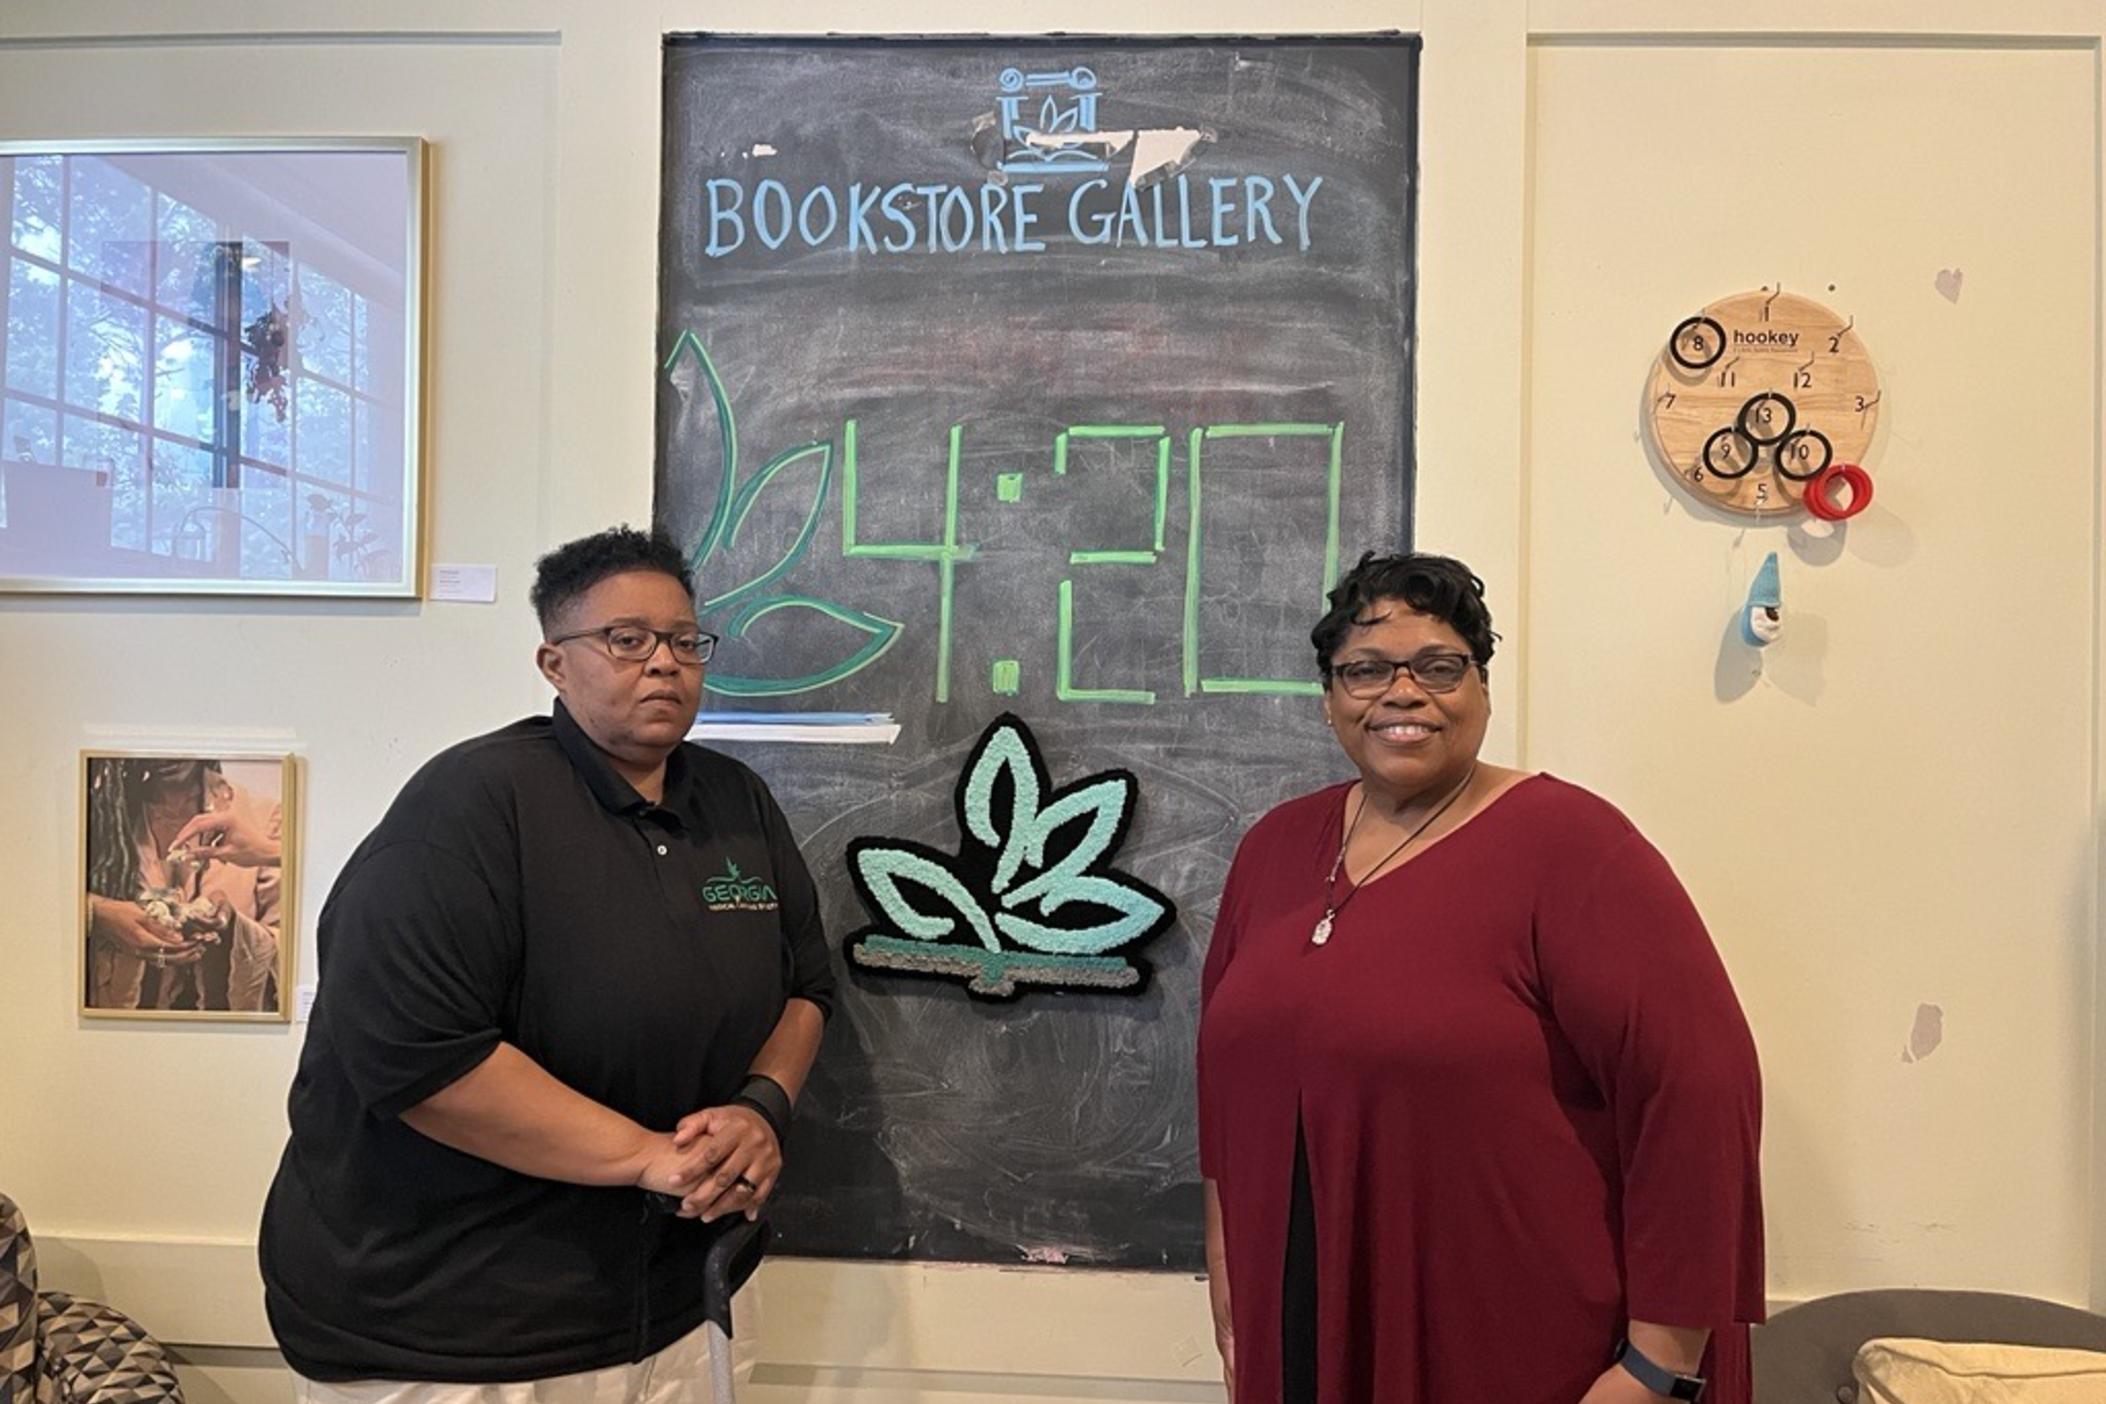 Georgia Medical Cannabis Society Founders Yolanda Bennett (left) and Angela Weston (right) frequent the Bookstore Gallery, an Atlanta cannabis store, to buy products that help manage their pain.